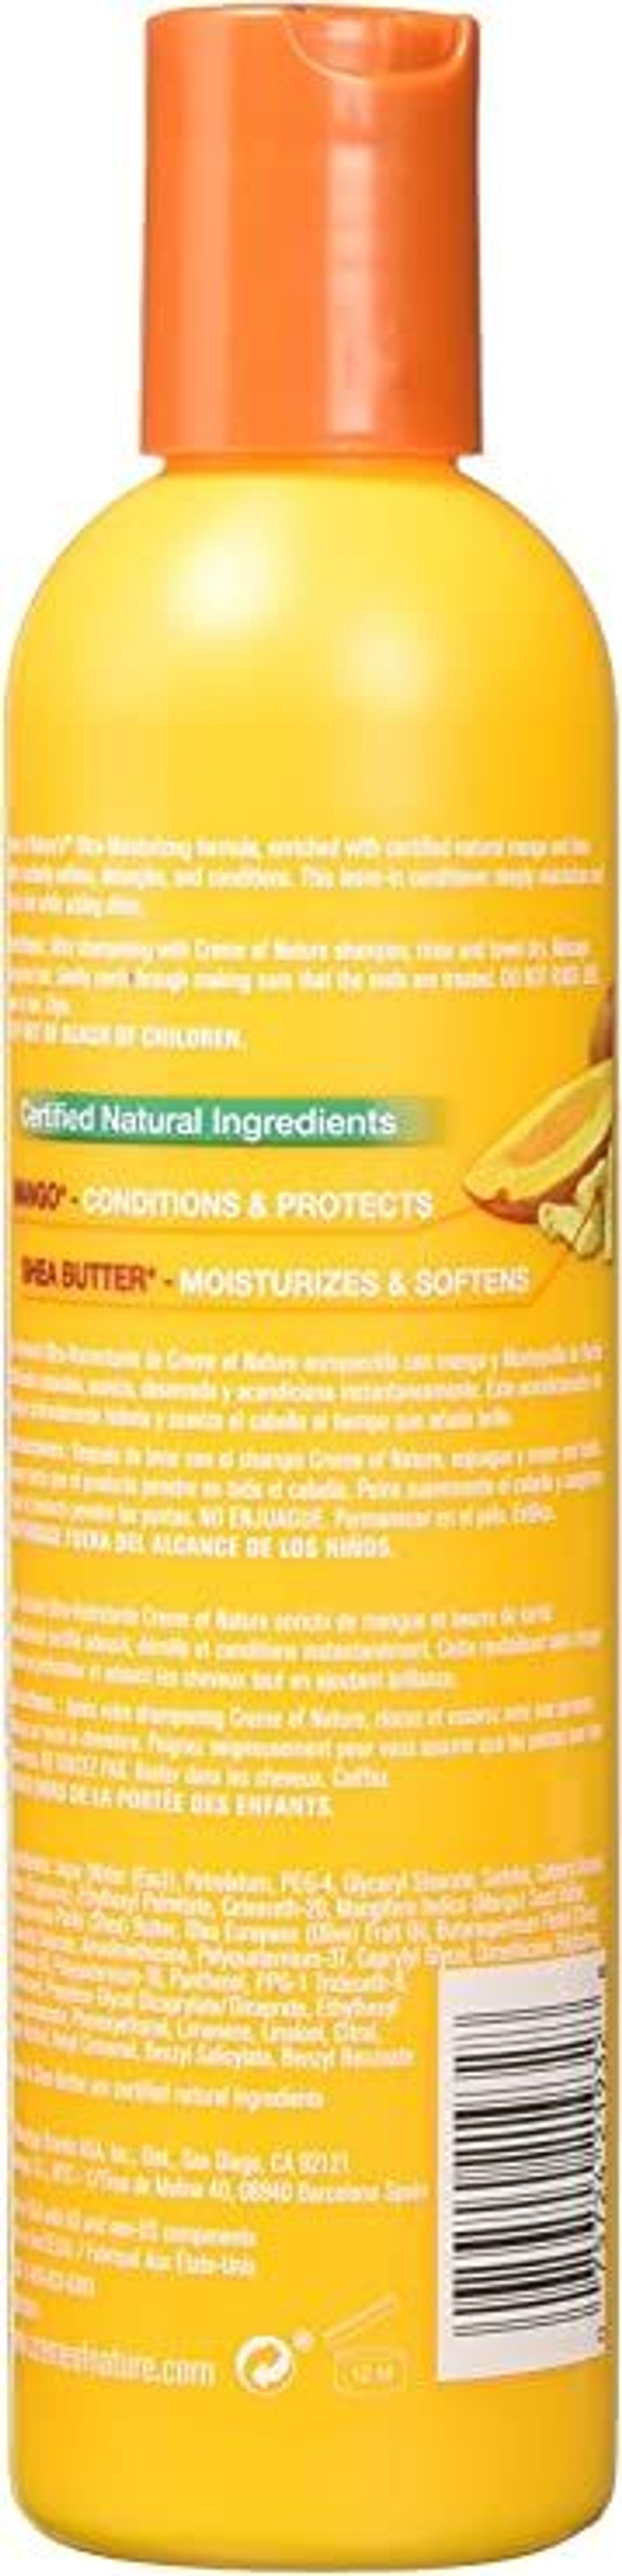 Creme Of Nature Mango & Shea Butter Ultra Moisturizing Leave-In Conditioner - 8.45oz